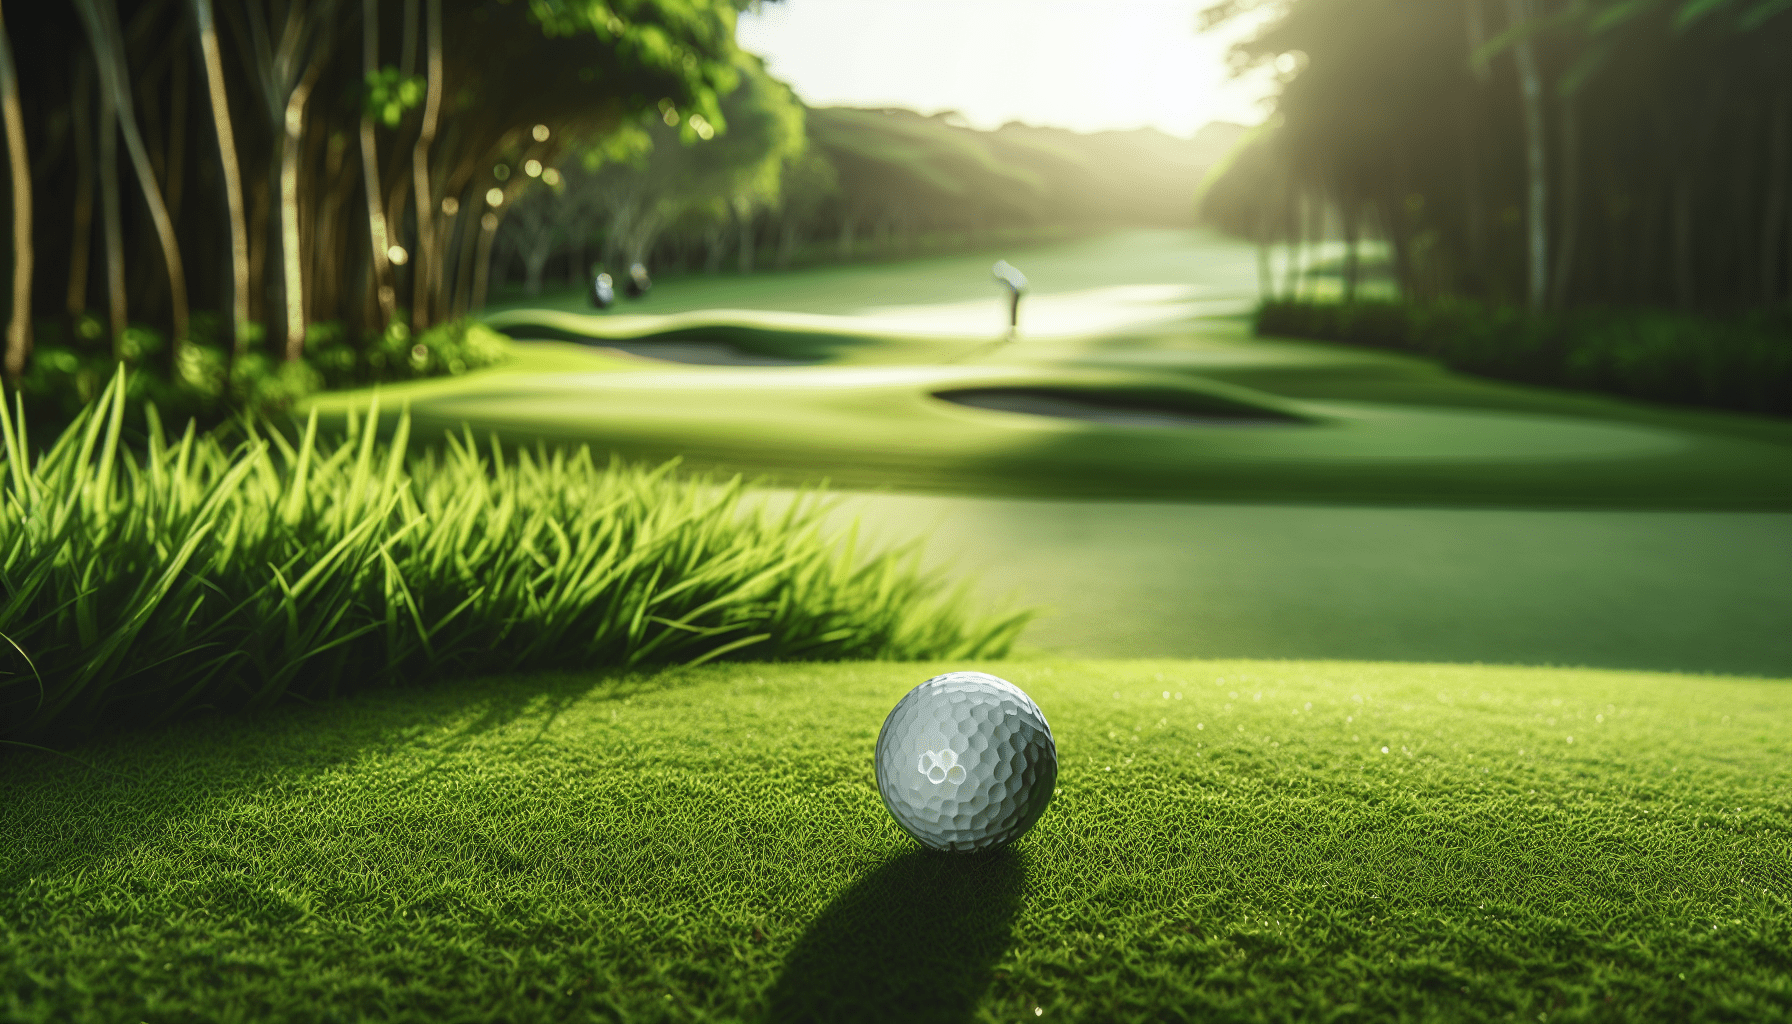 Which Hotels Near Topgolf Dallas Have Good Facilities For Golfers?